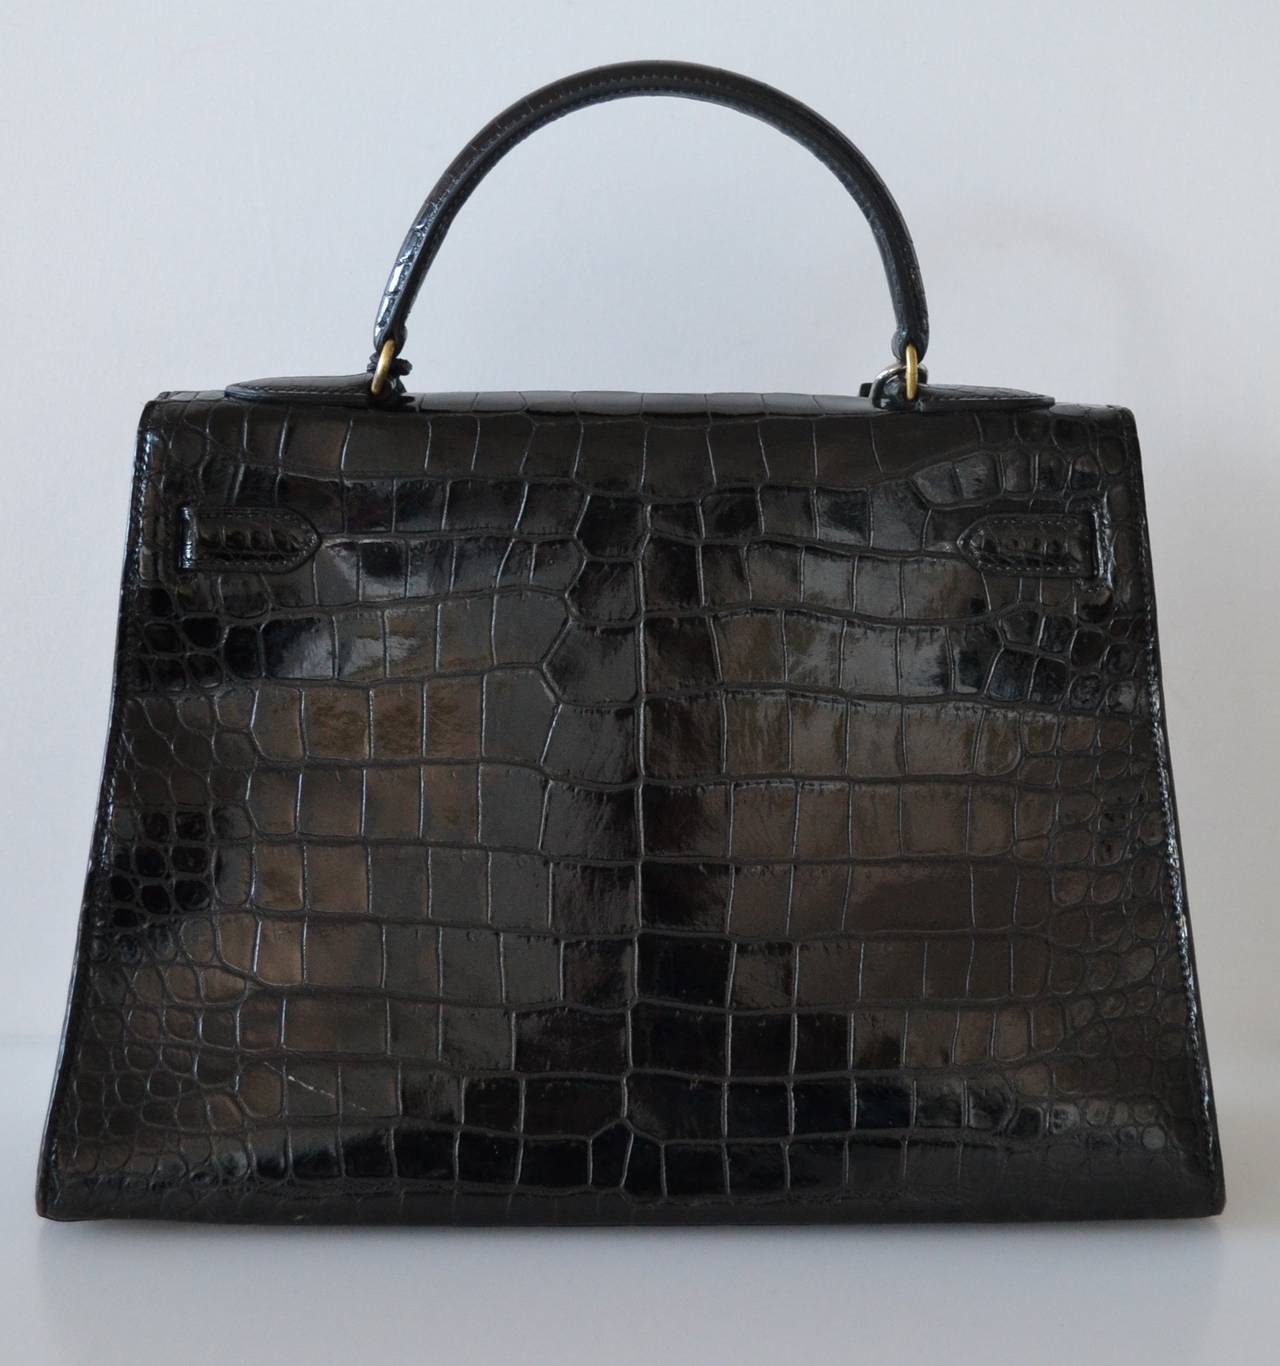 Hermes Kelly 32 Black Crocodile
 
Black crocodile Porosus skin with gold hardware
Sellier
 
The bag is lined with chevre leather. Interior is in excellent condition.
This bag is in very good condition. Odorless
No important scratches, holes